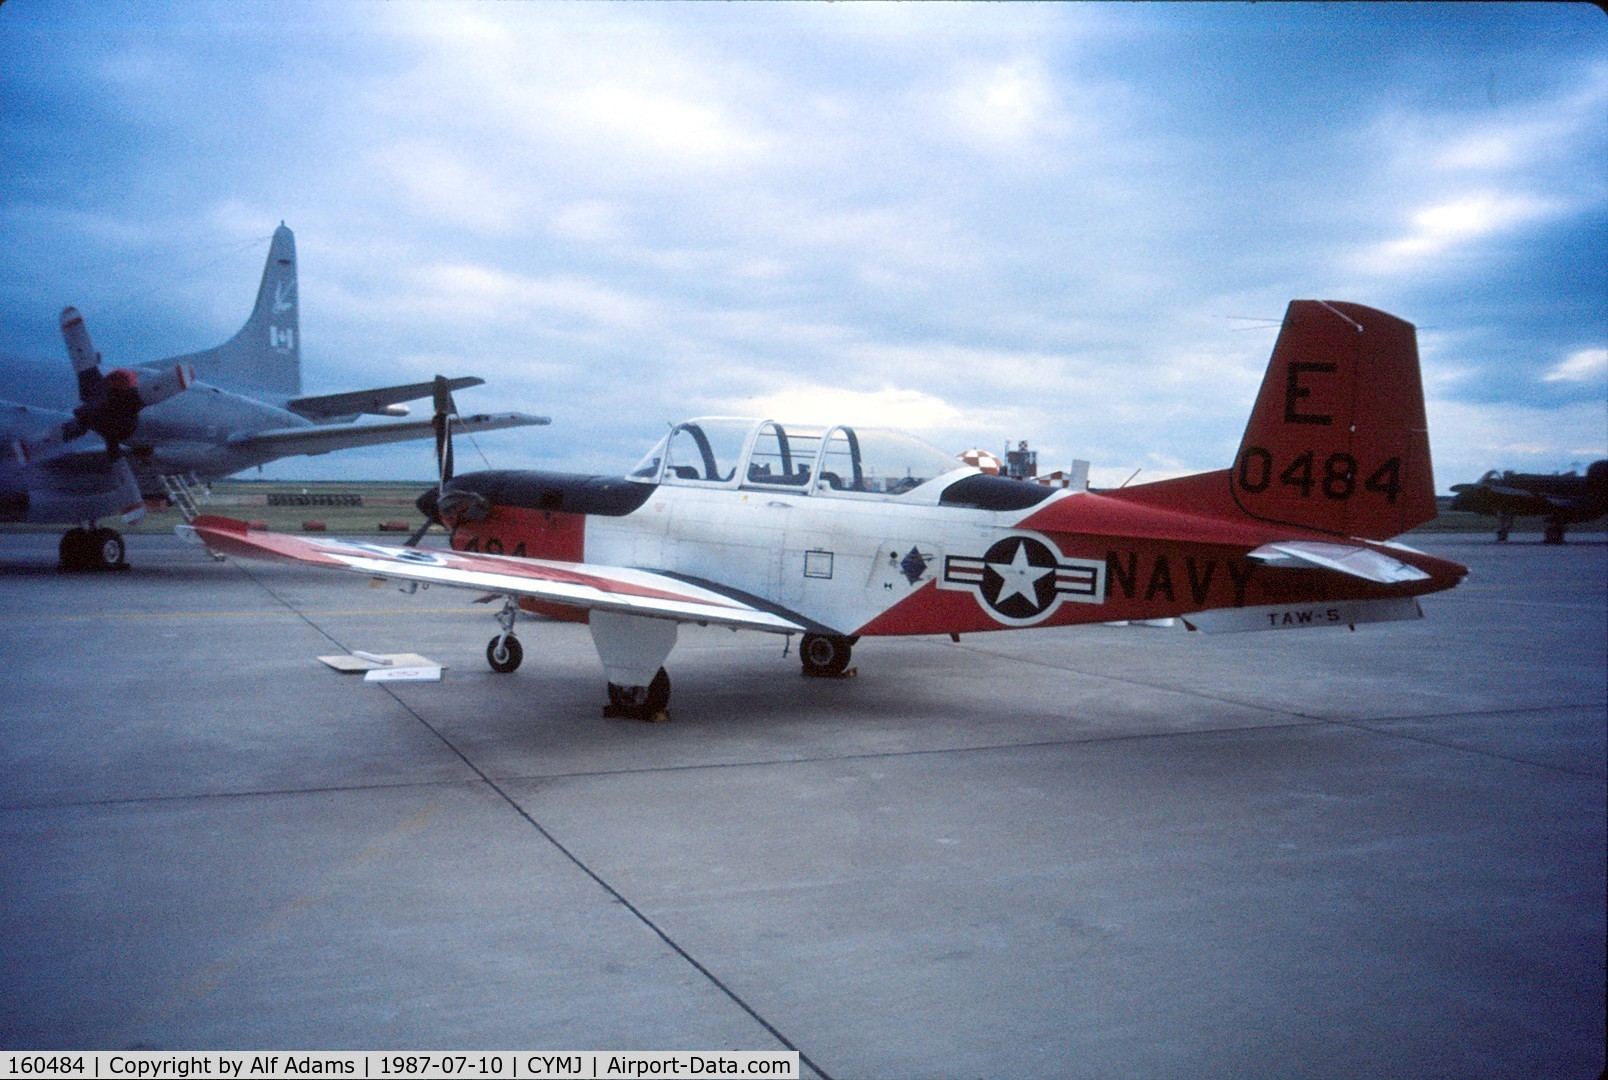 160484, Beech T-34C Turbo  Mentor C/N GL-41, T-34C Turbo Mentor 160484 on display at the annual airshow at Canadian Forces Base Moose Jaw, Saskatchewan, Canada in 1987.